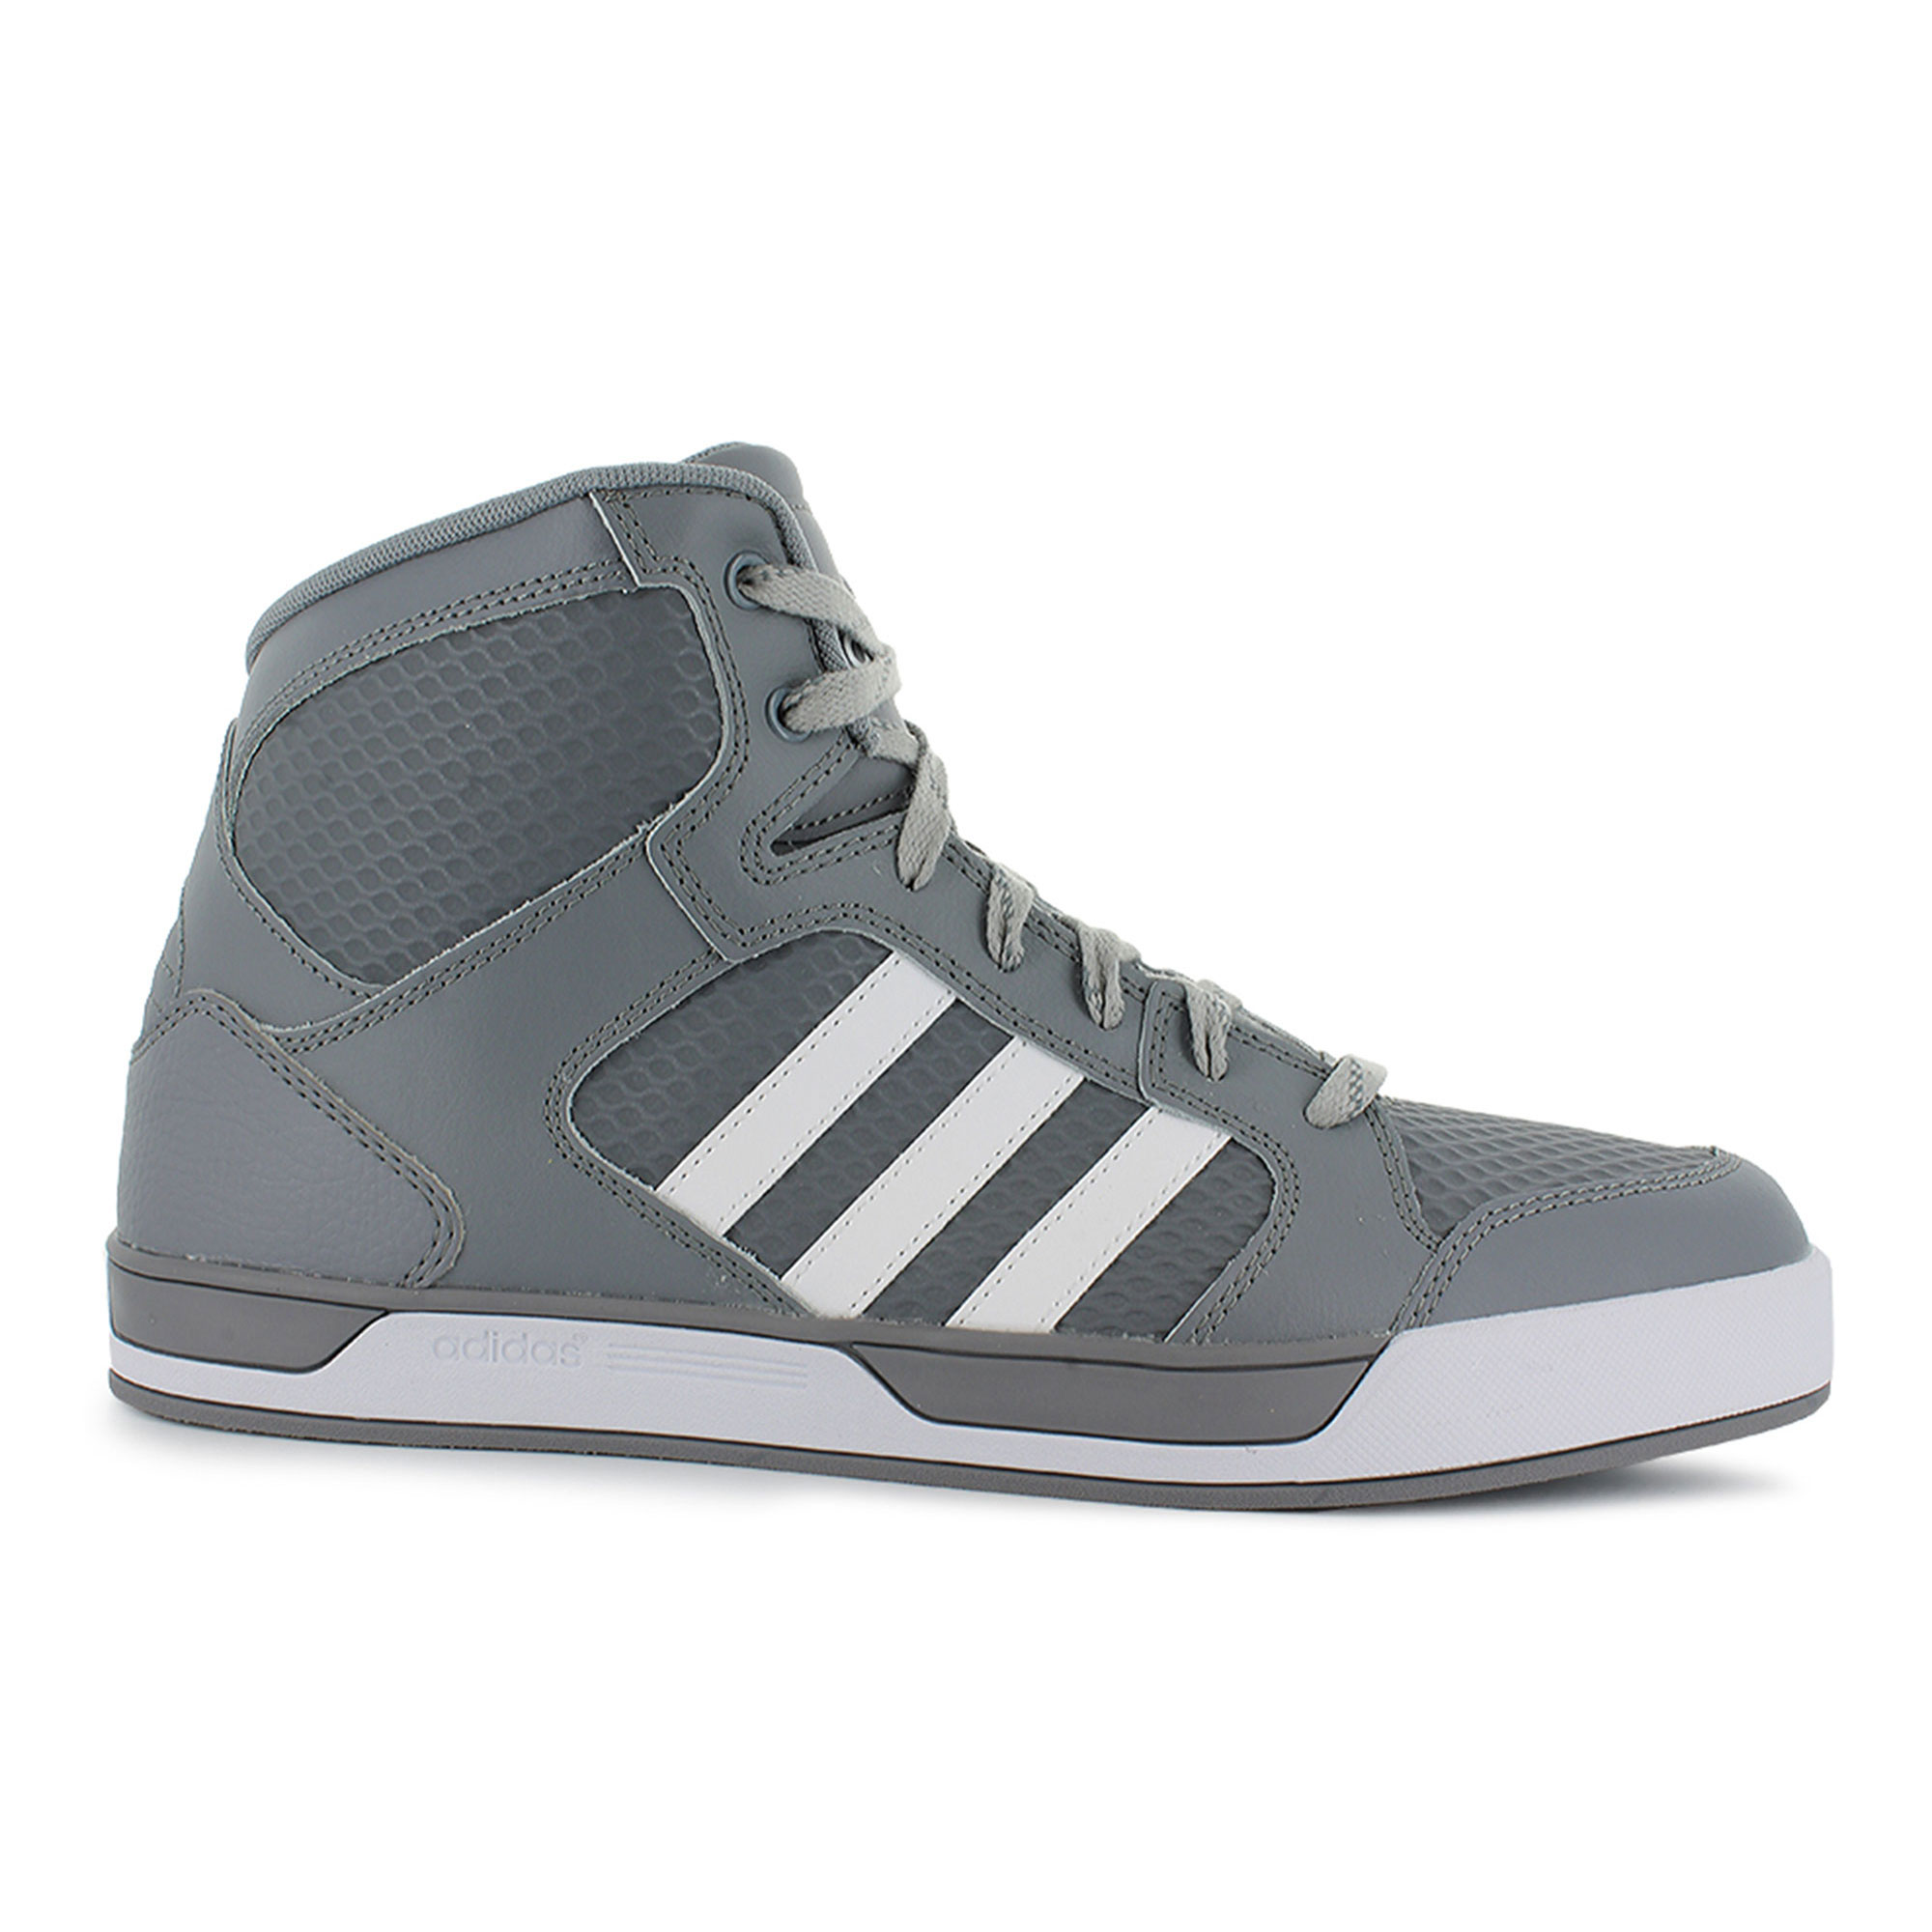 adidas raleigh mid shoes